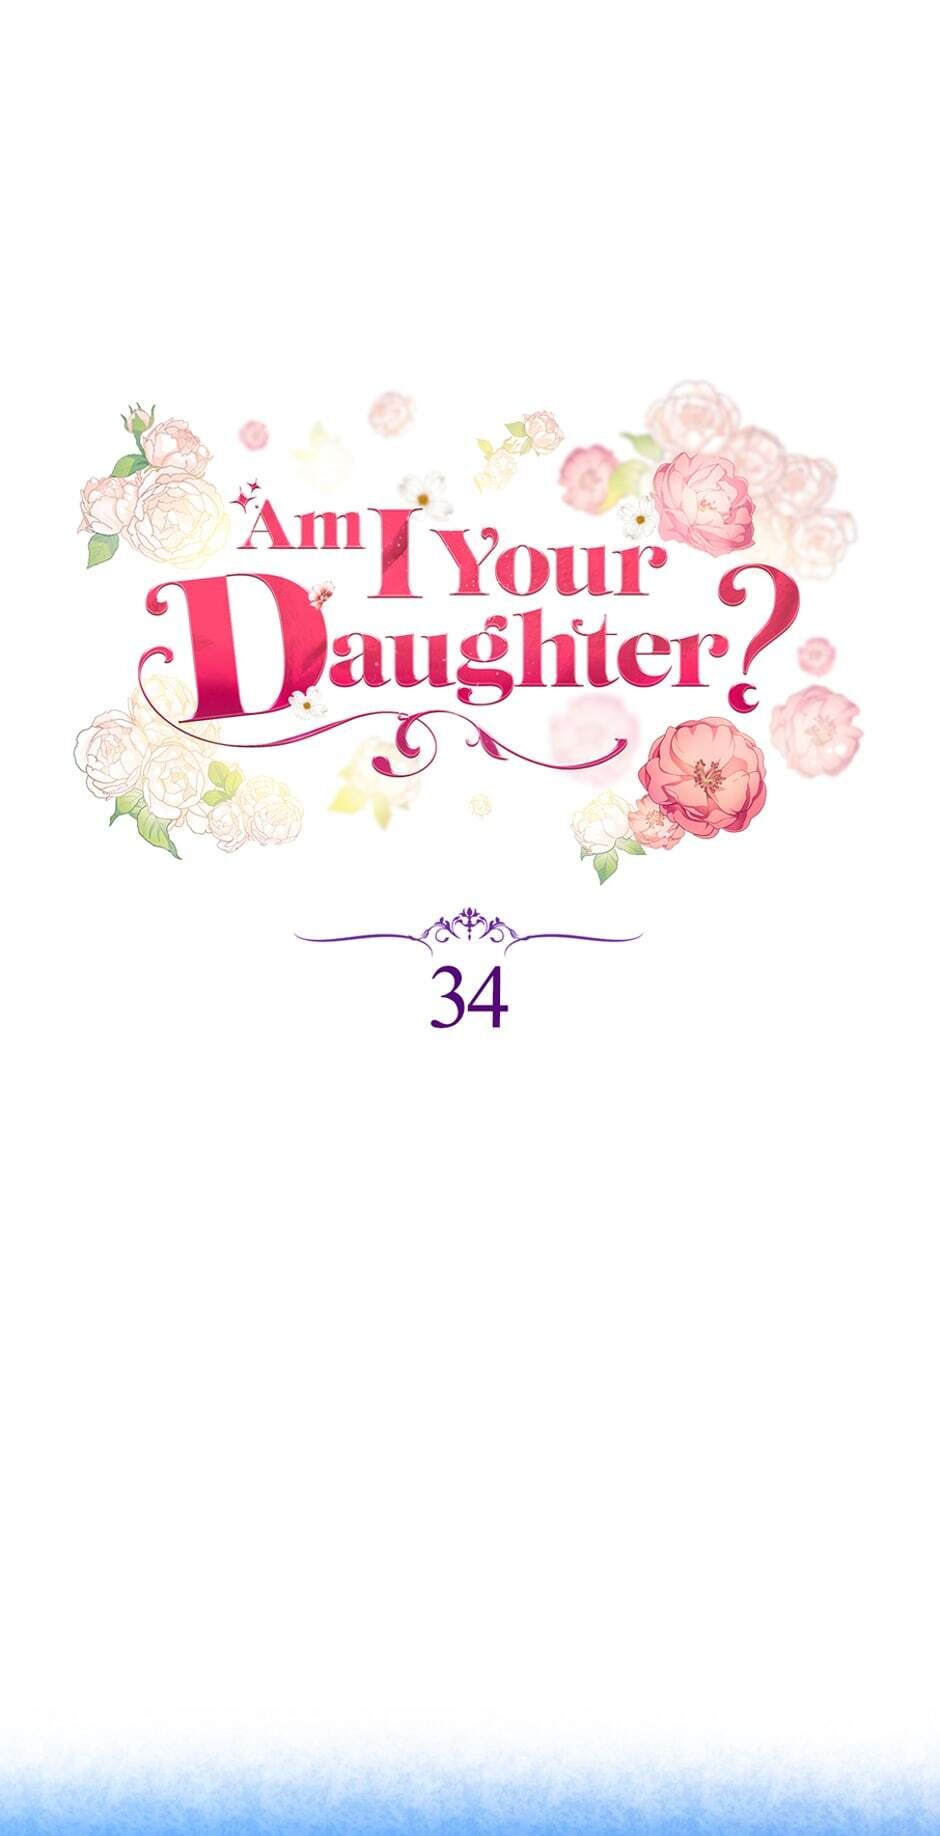 Am I Your Daughter? - Page 3